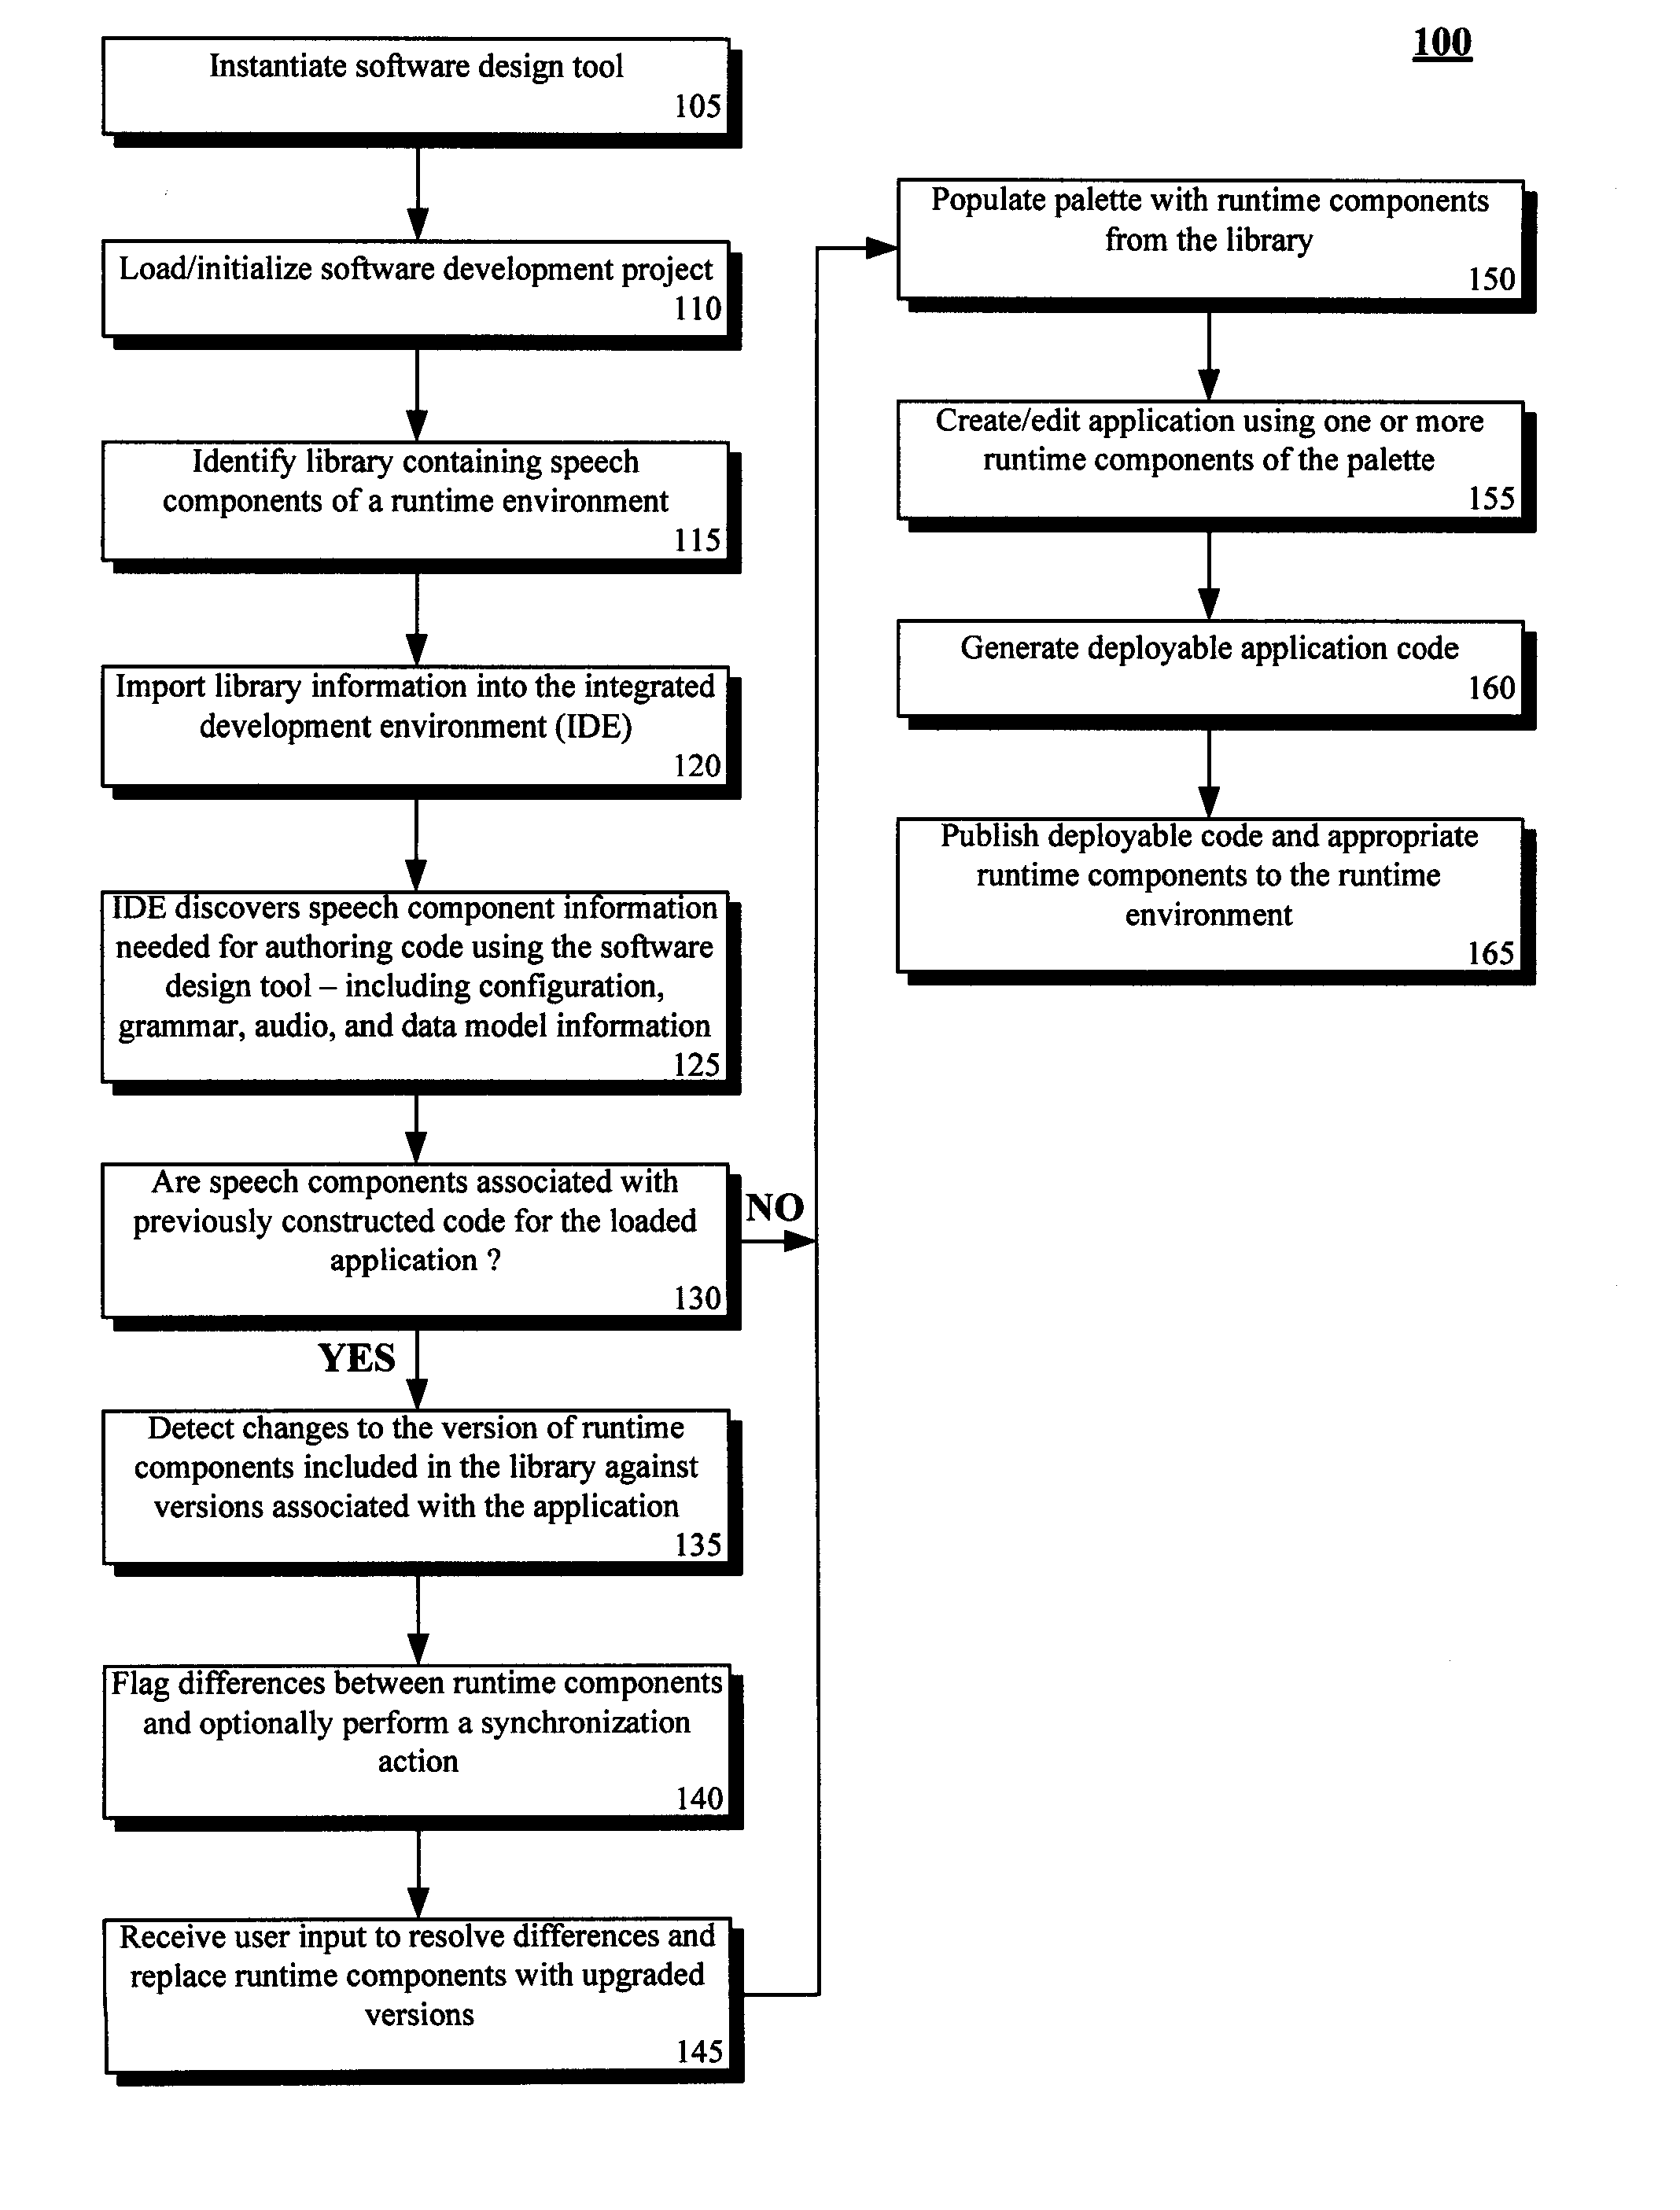 Method and system for automatically discovering and populating a palette of reusable dialog components